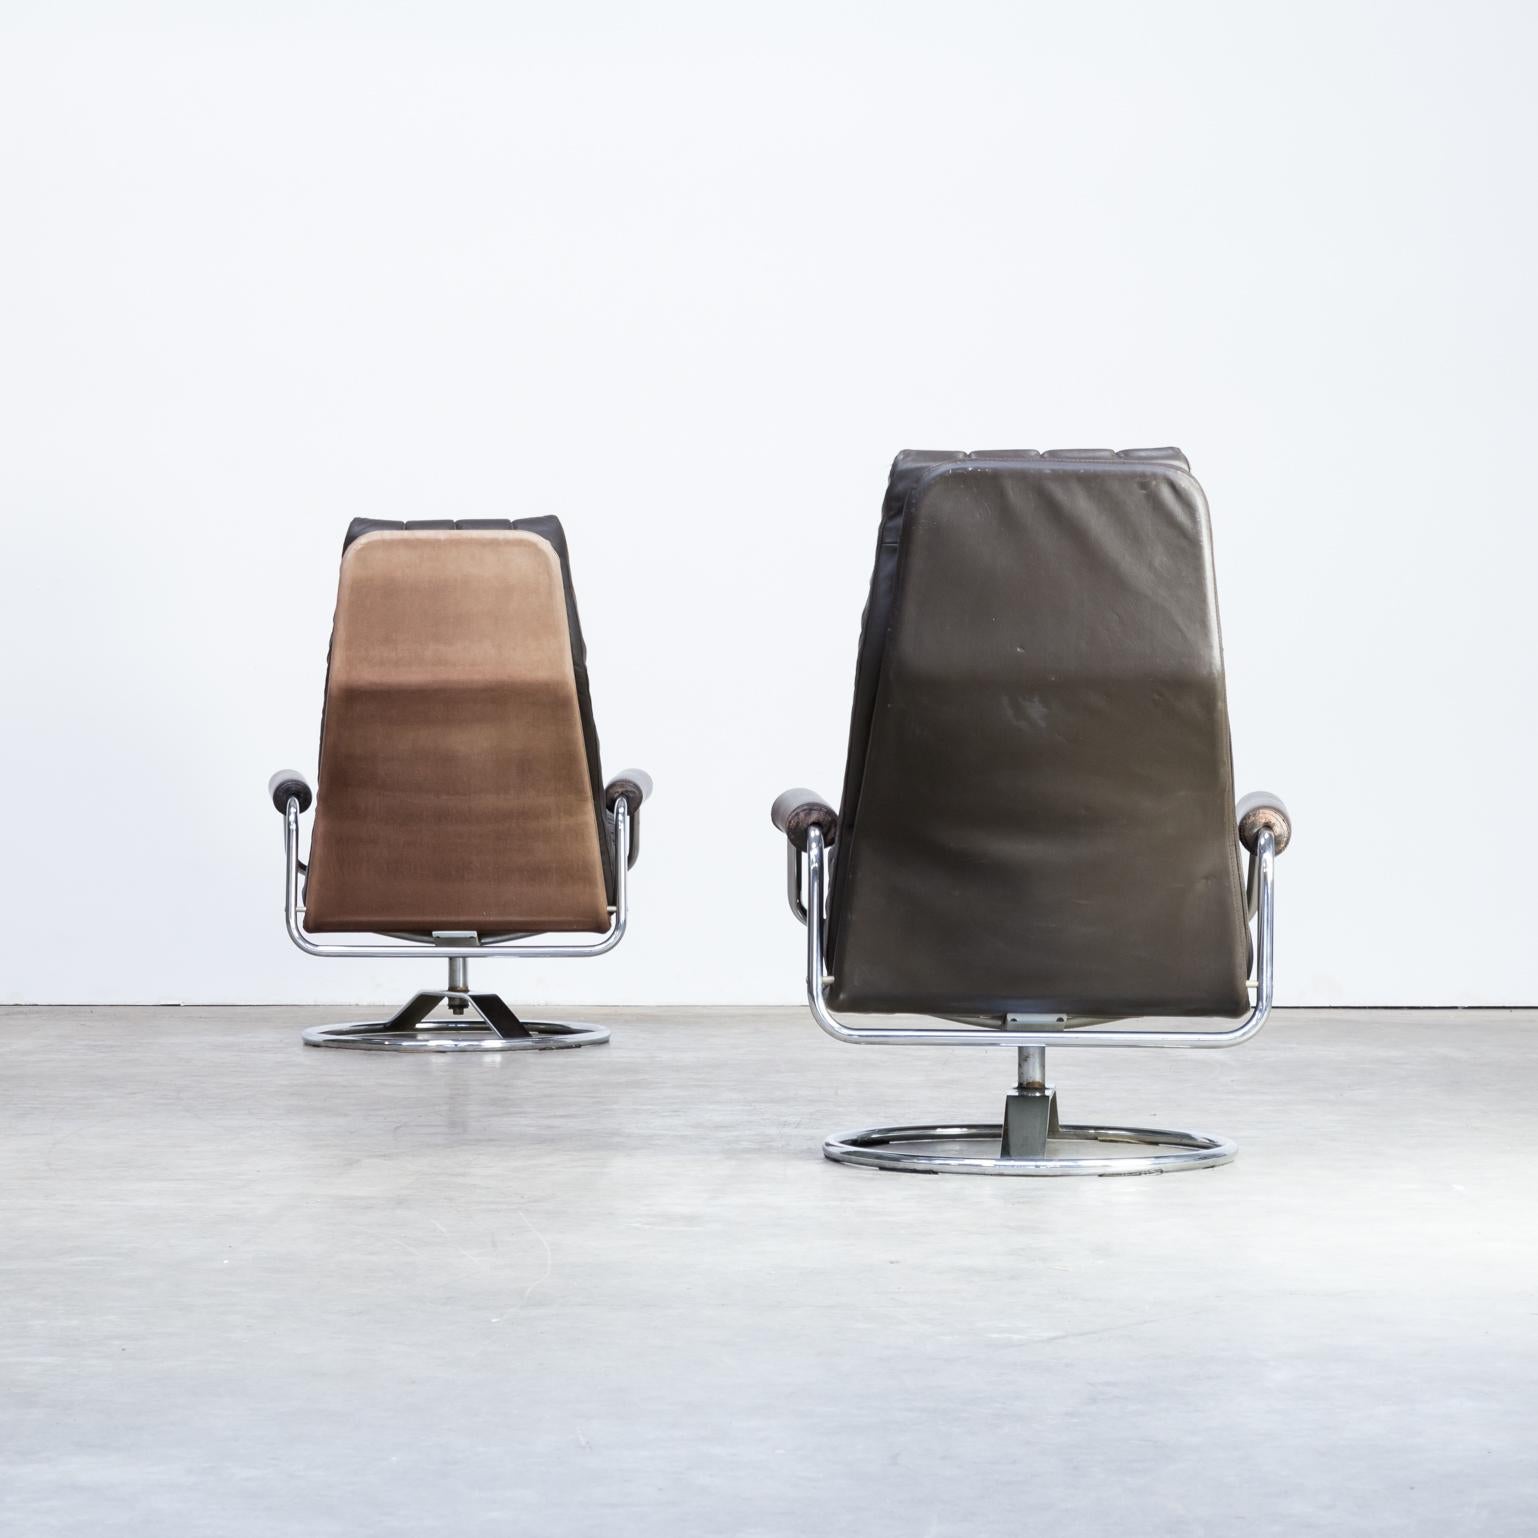 1970s Leather Lounge Fauteuil Swivel Chair Set of 2 For Sale 3